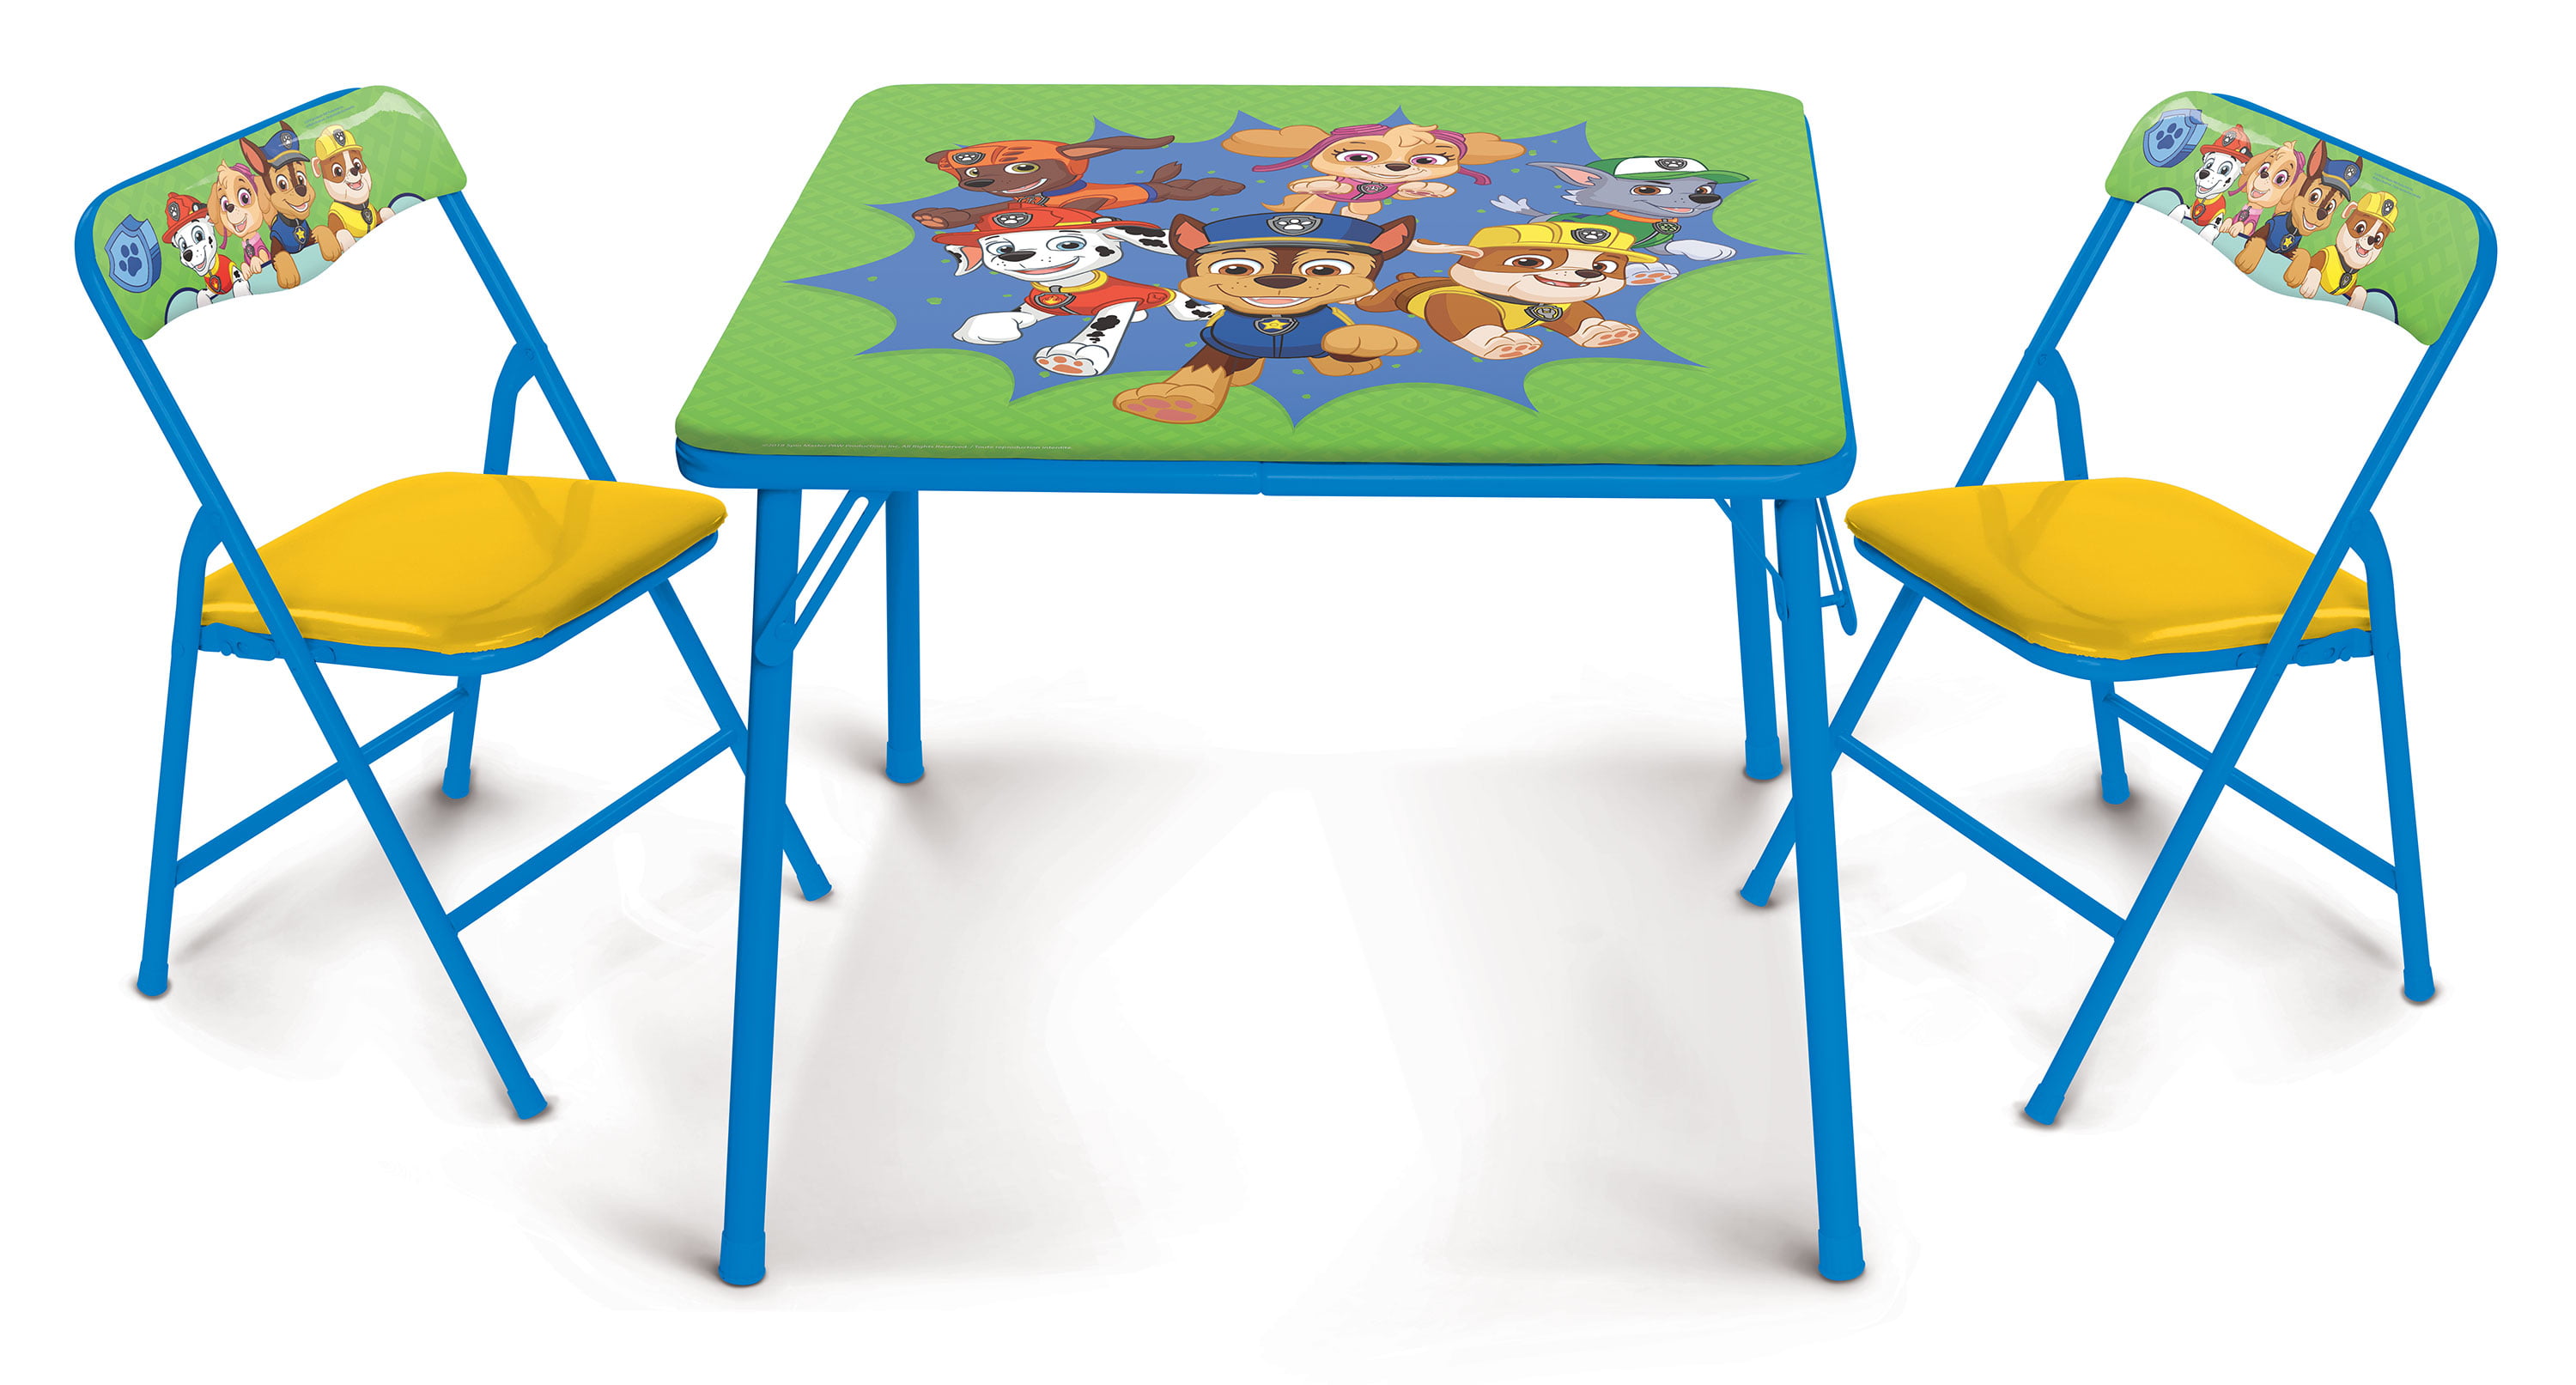 paw patrol kids erasable activity table includes 2 chairs with safety lock  non skid rubber feet  padded seats greenyellow